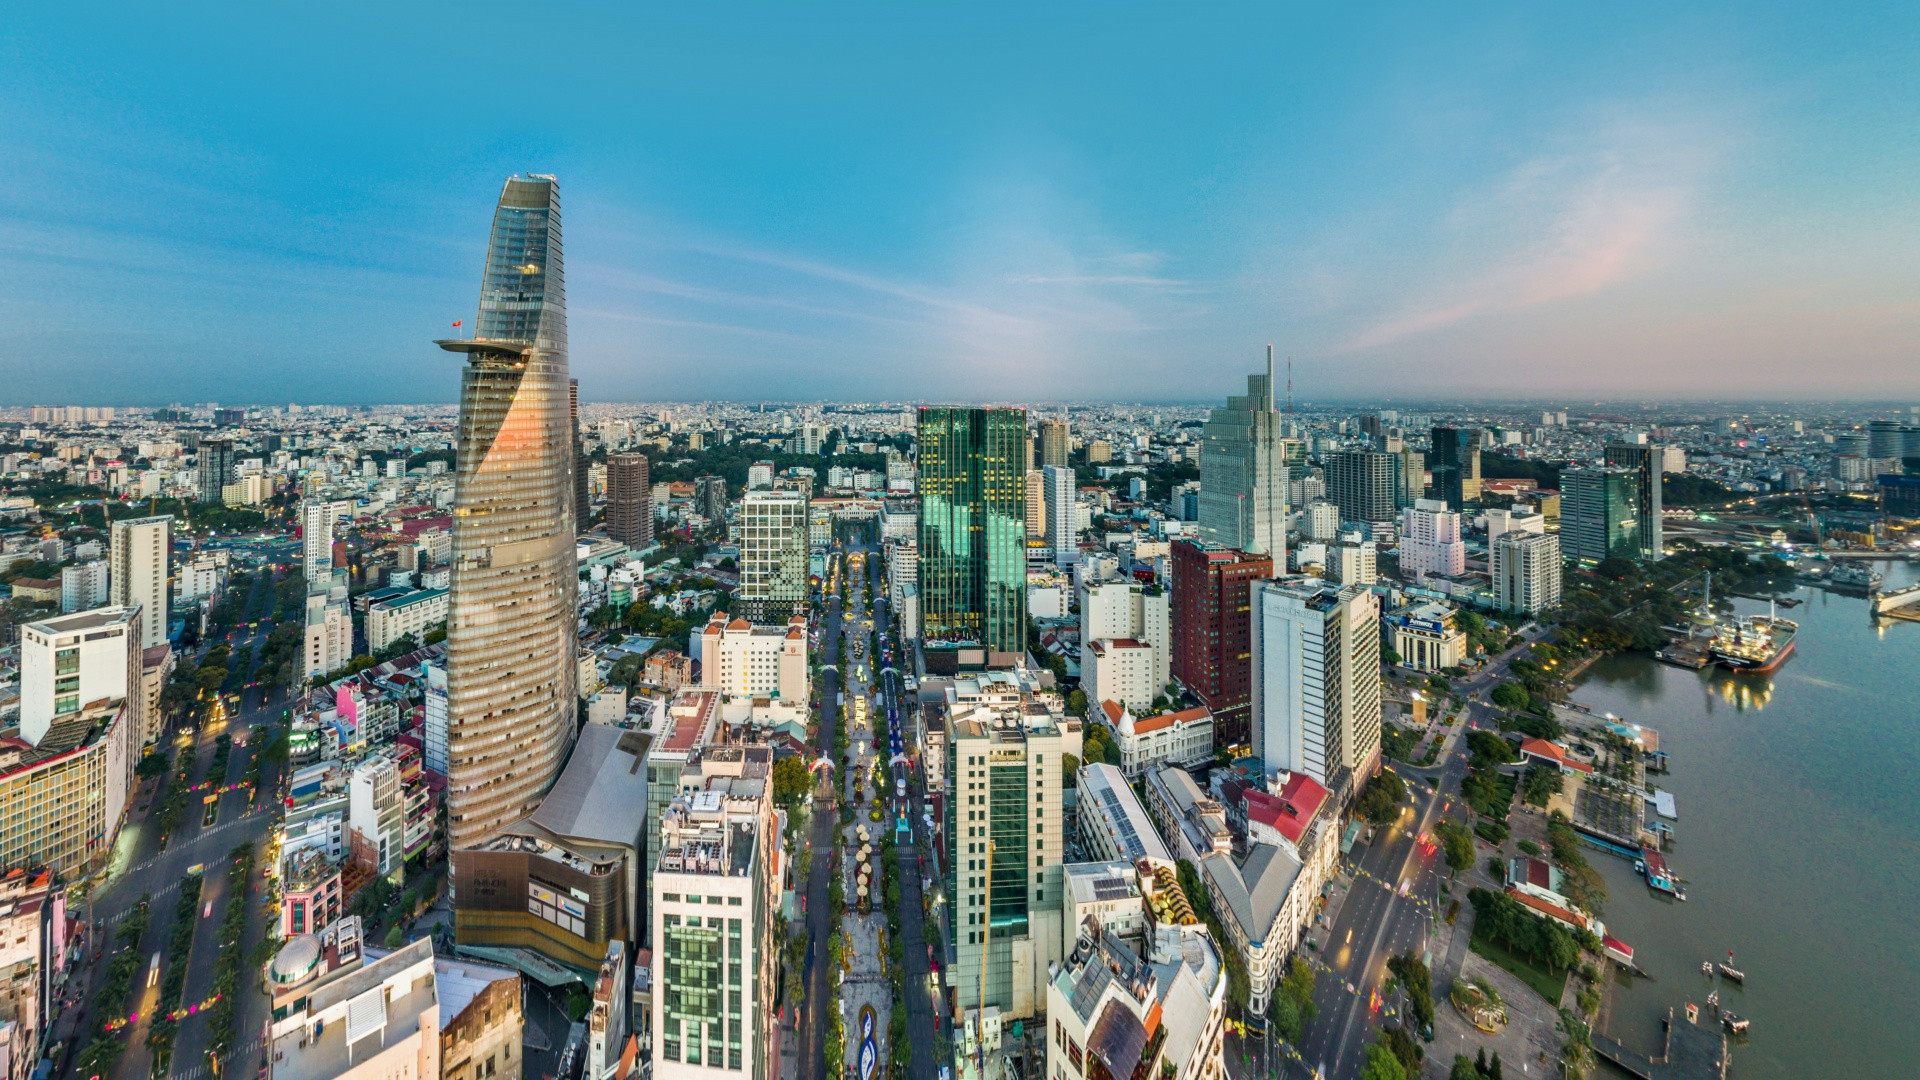 vietnam-jumped-five-spots-to-rank-54-in-the-top-global-startup-ecosystems-1be7bb663a09484d8ab3f8d5b0d9a84b.jpg